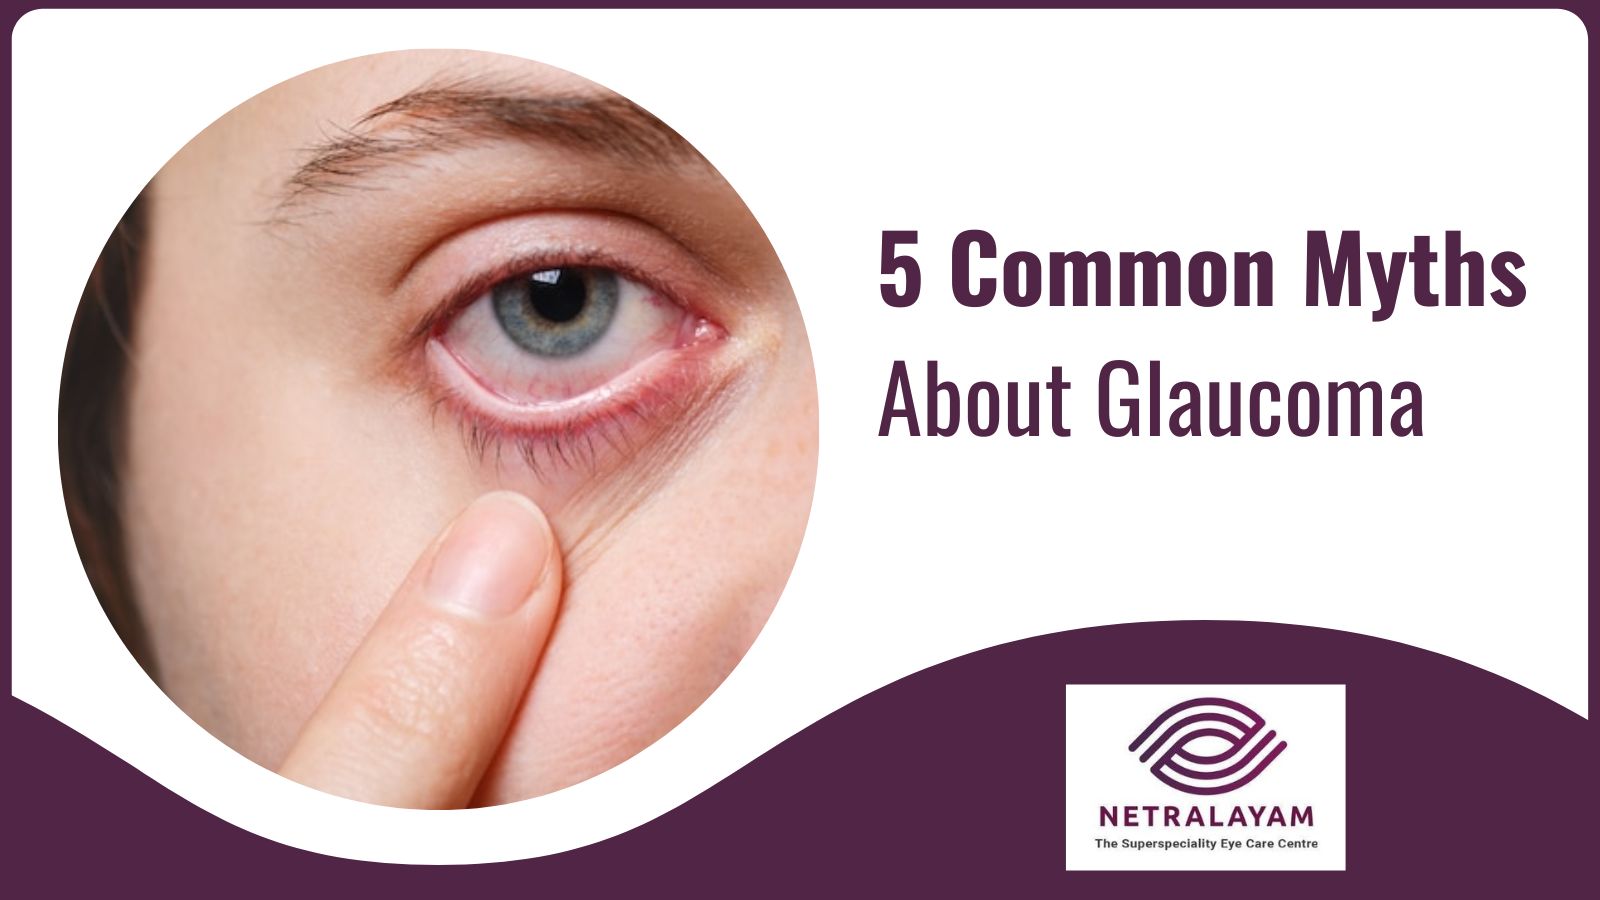 5 Common Myths About Glaucoma